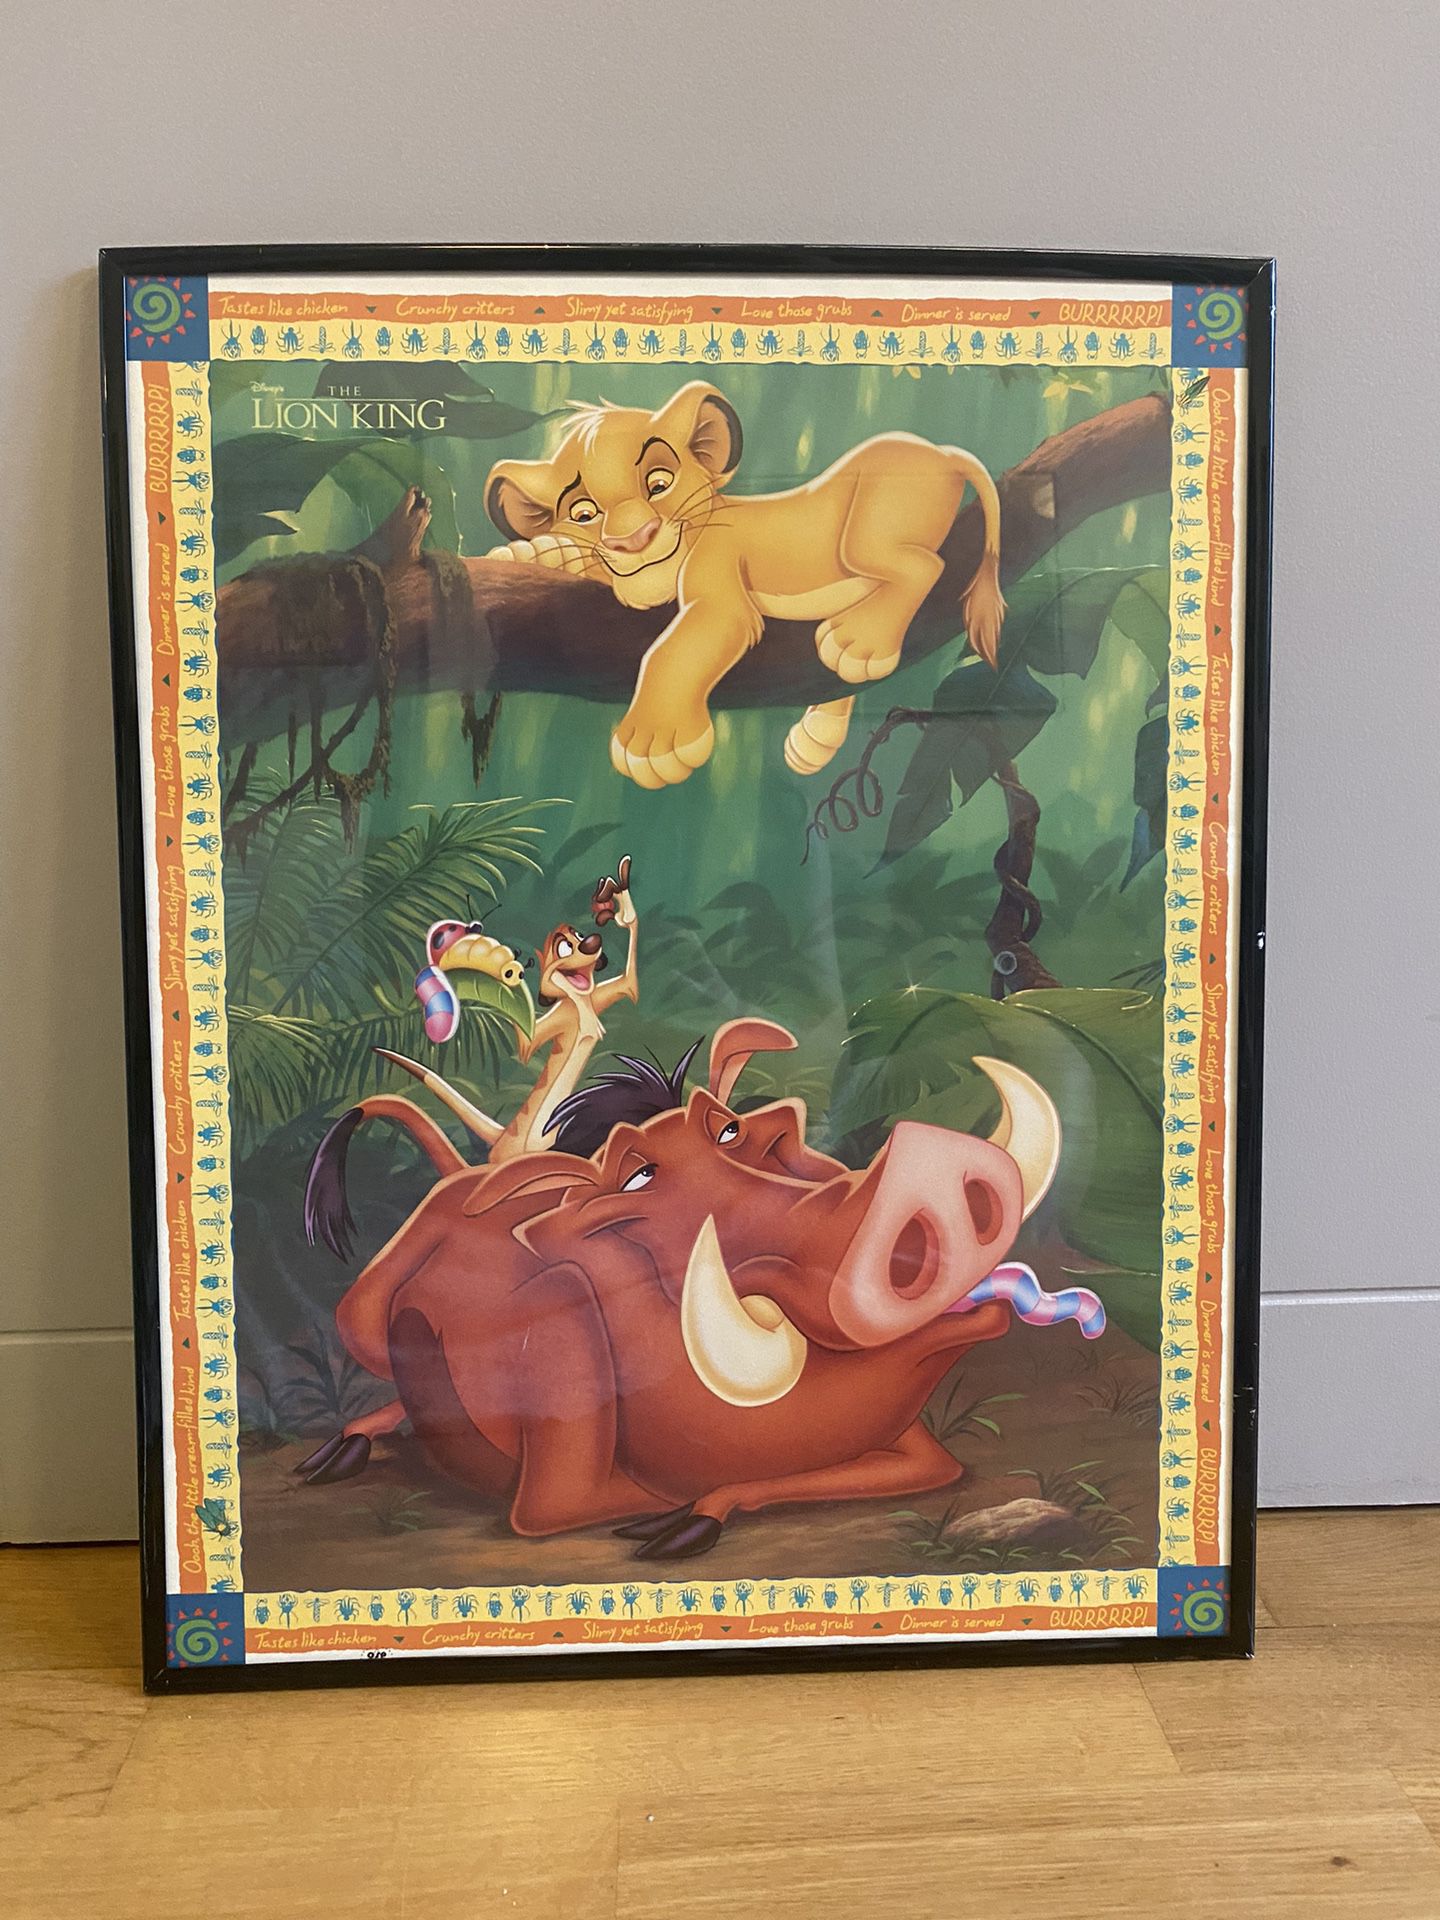  Vintage lion King Poster From The 90s